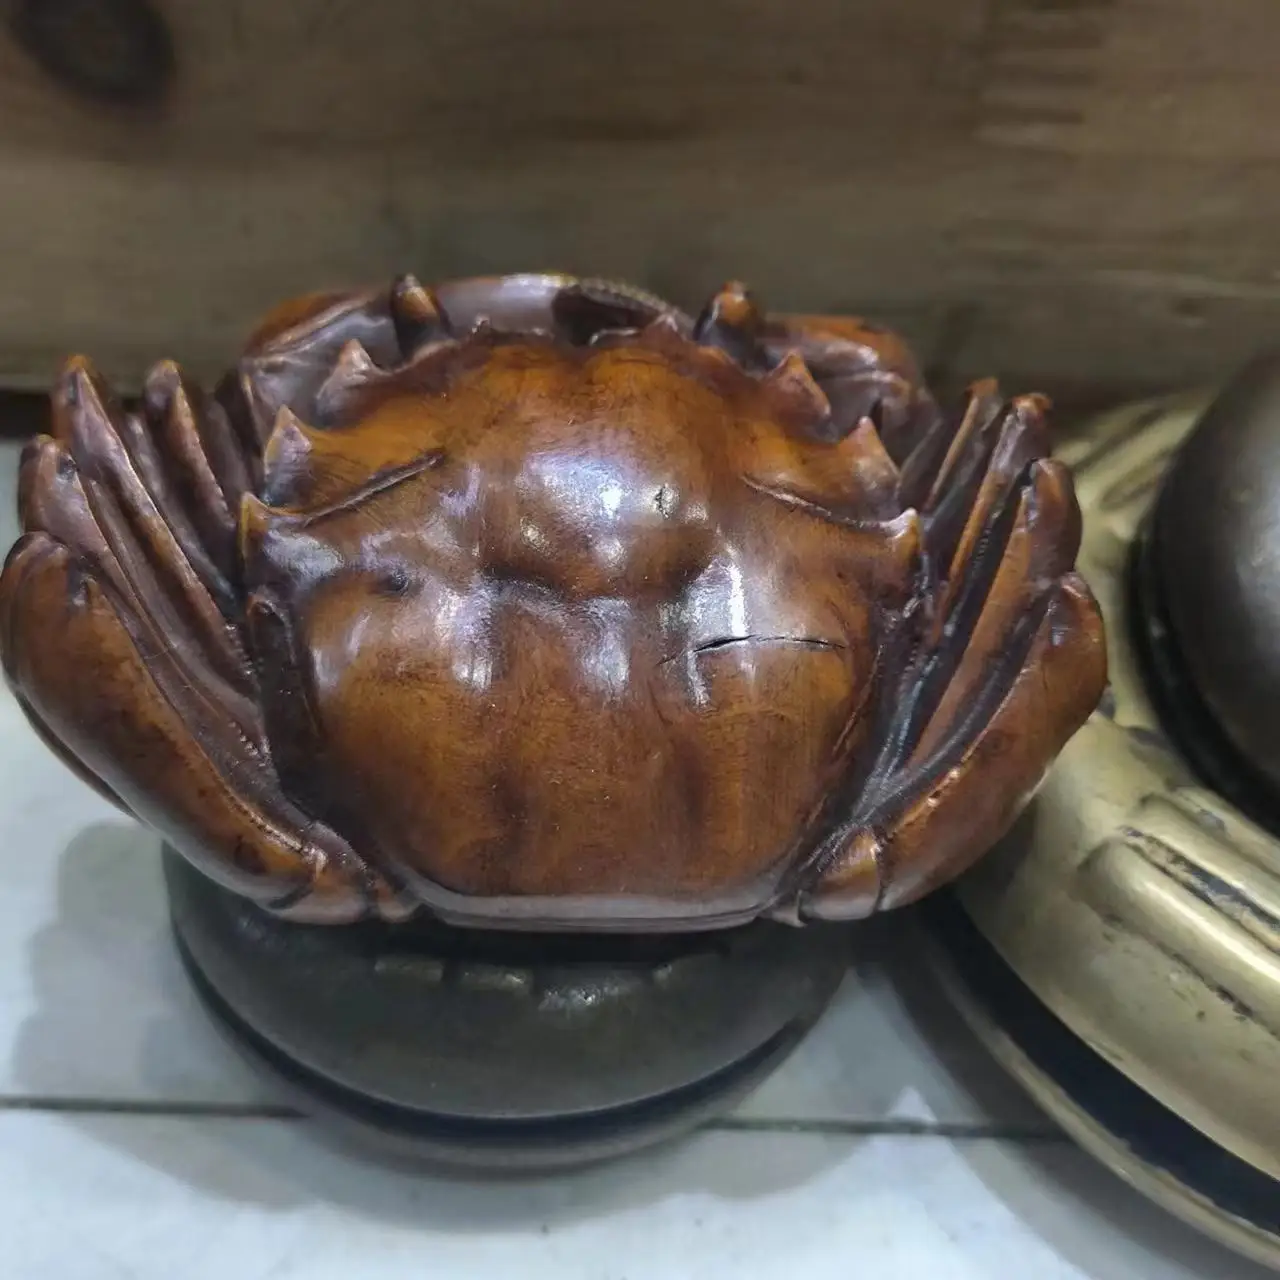 1pcs/lot boxwood carved crab ornament Good meaning Solid wood handicraft Tea pets Collectible Superb craftsmanship Animal shape 1pc solid wood jewelry tray wood bracelet design plate animal shape display plate bracelet storage head jewelry tray